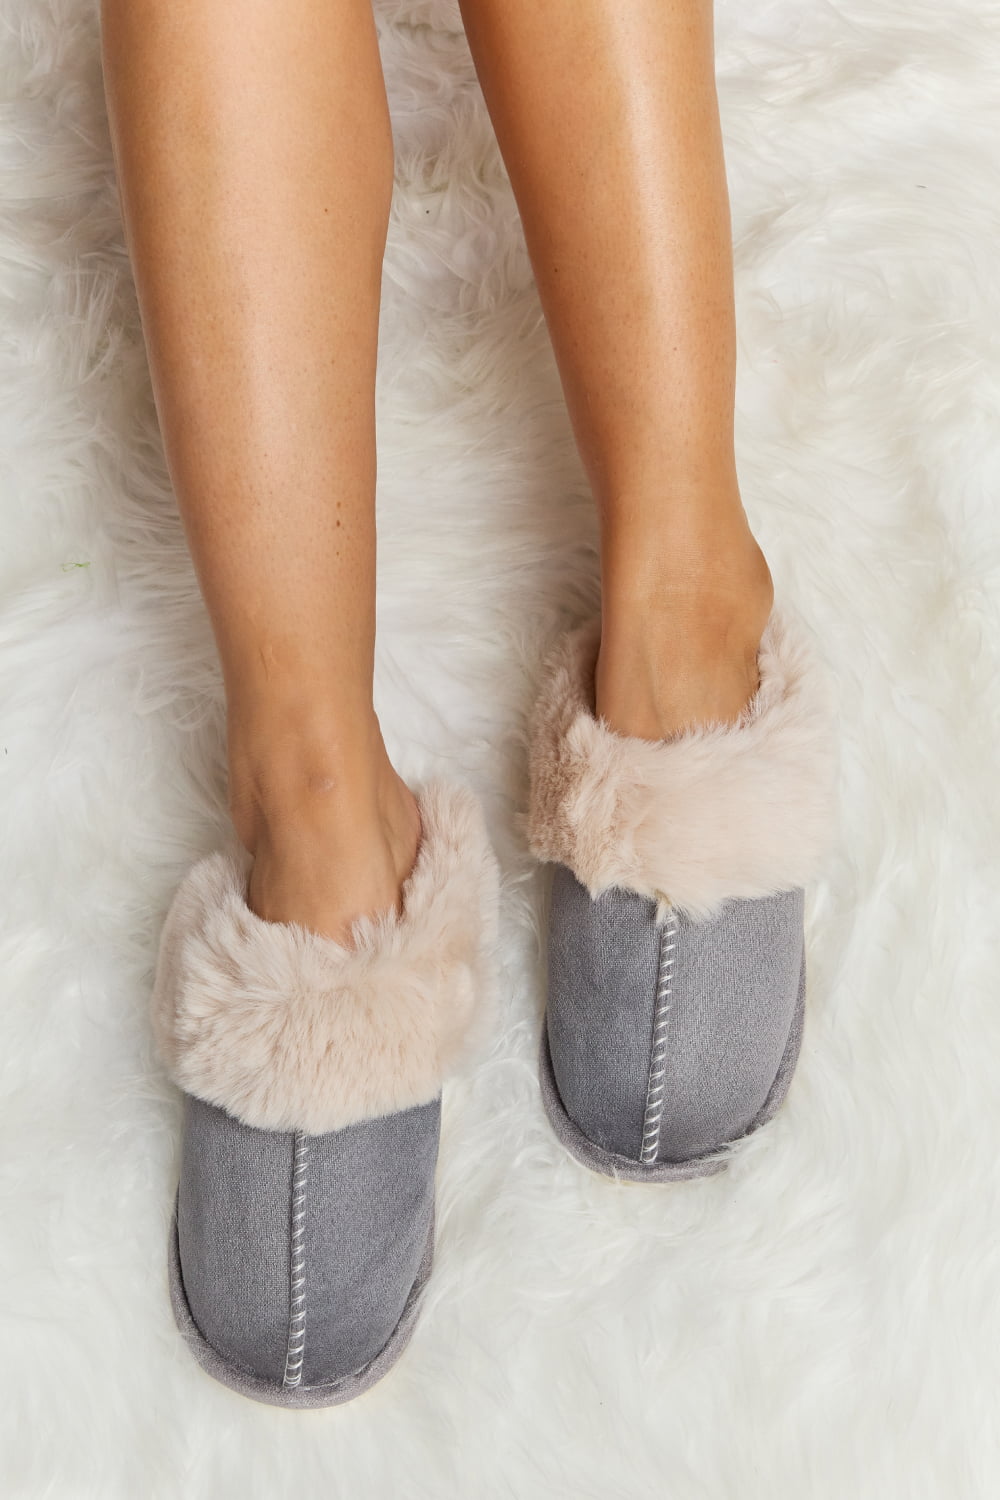 Melody Fluffy Indoor Slippers - Earth Angel Lifestyle